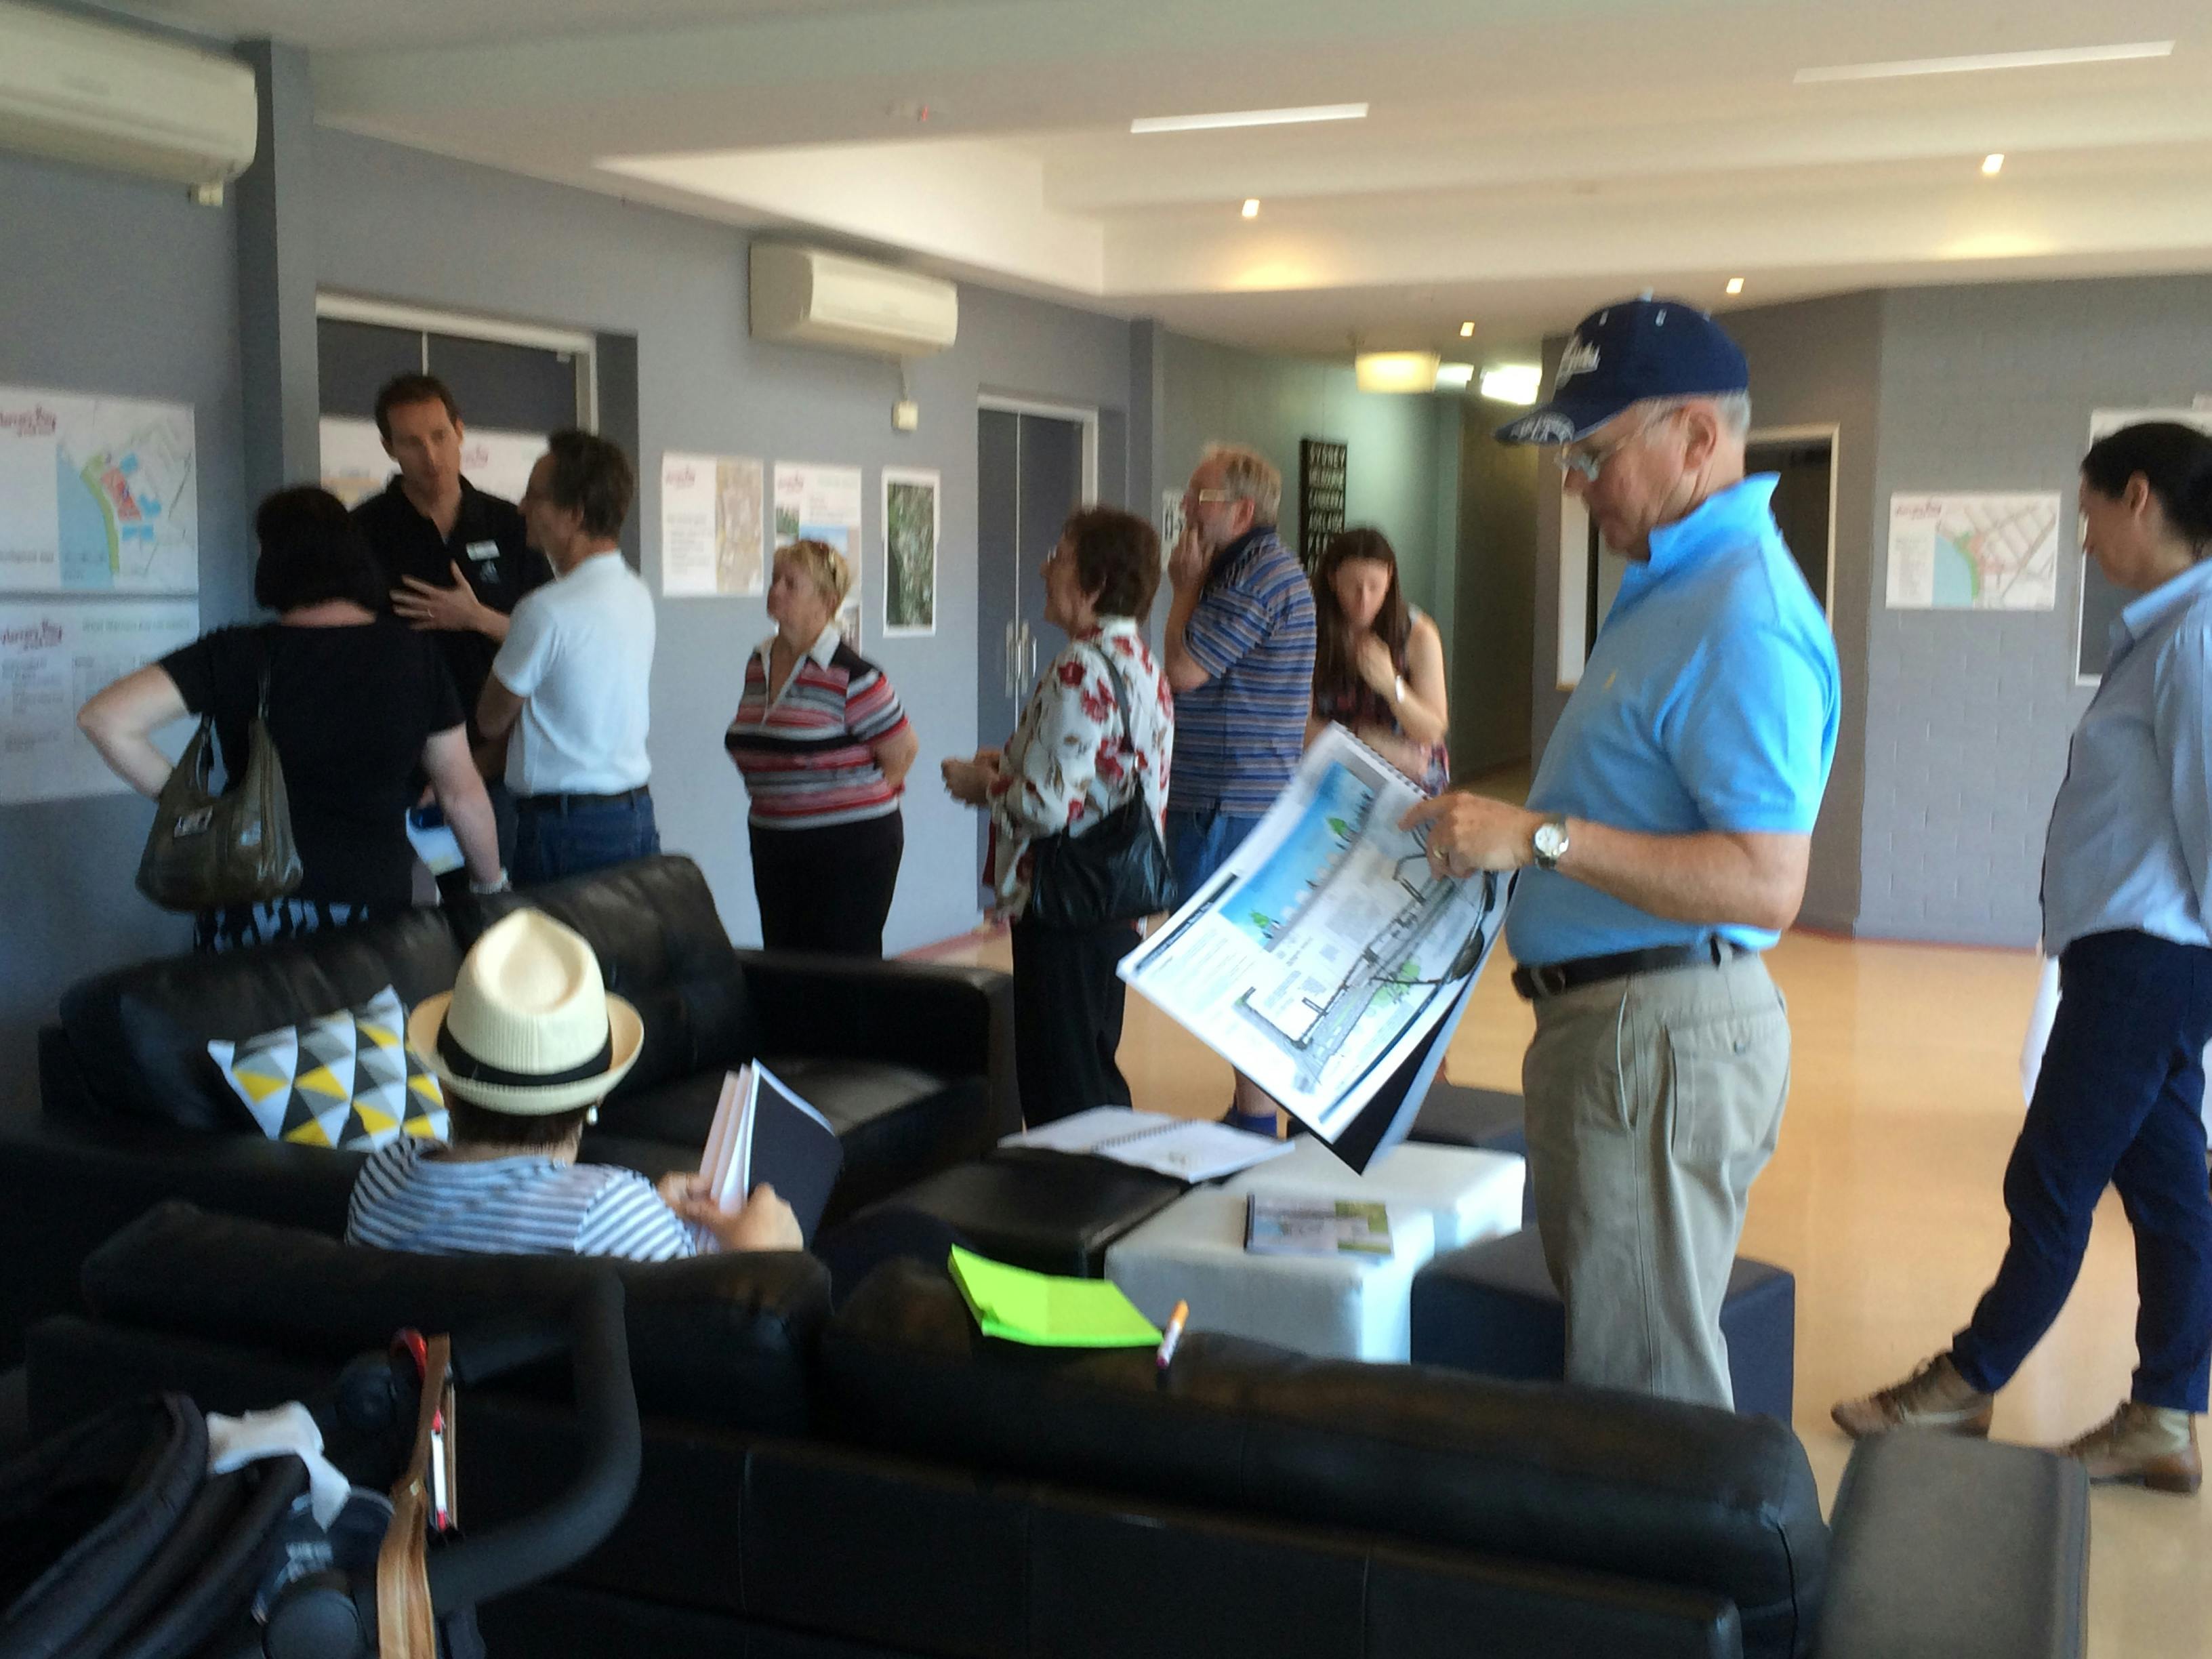 Learning more about Council's draft plans for Warners Bay